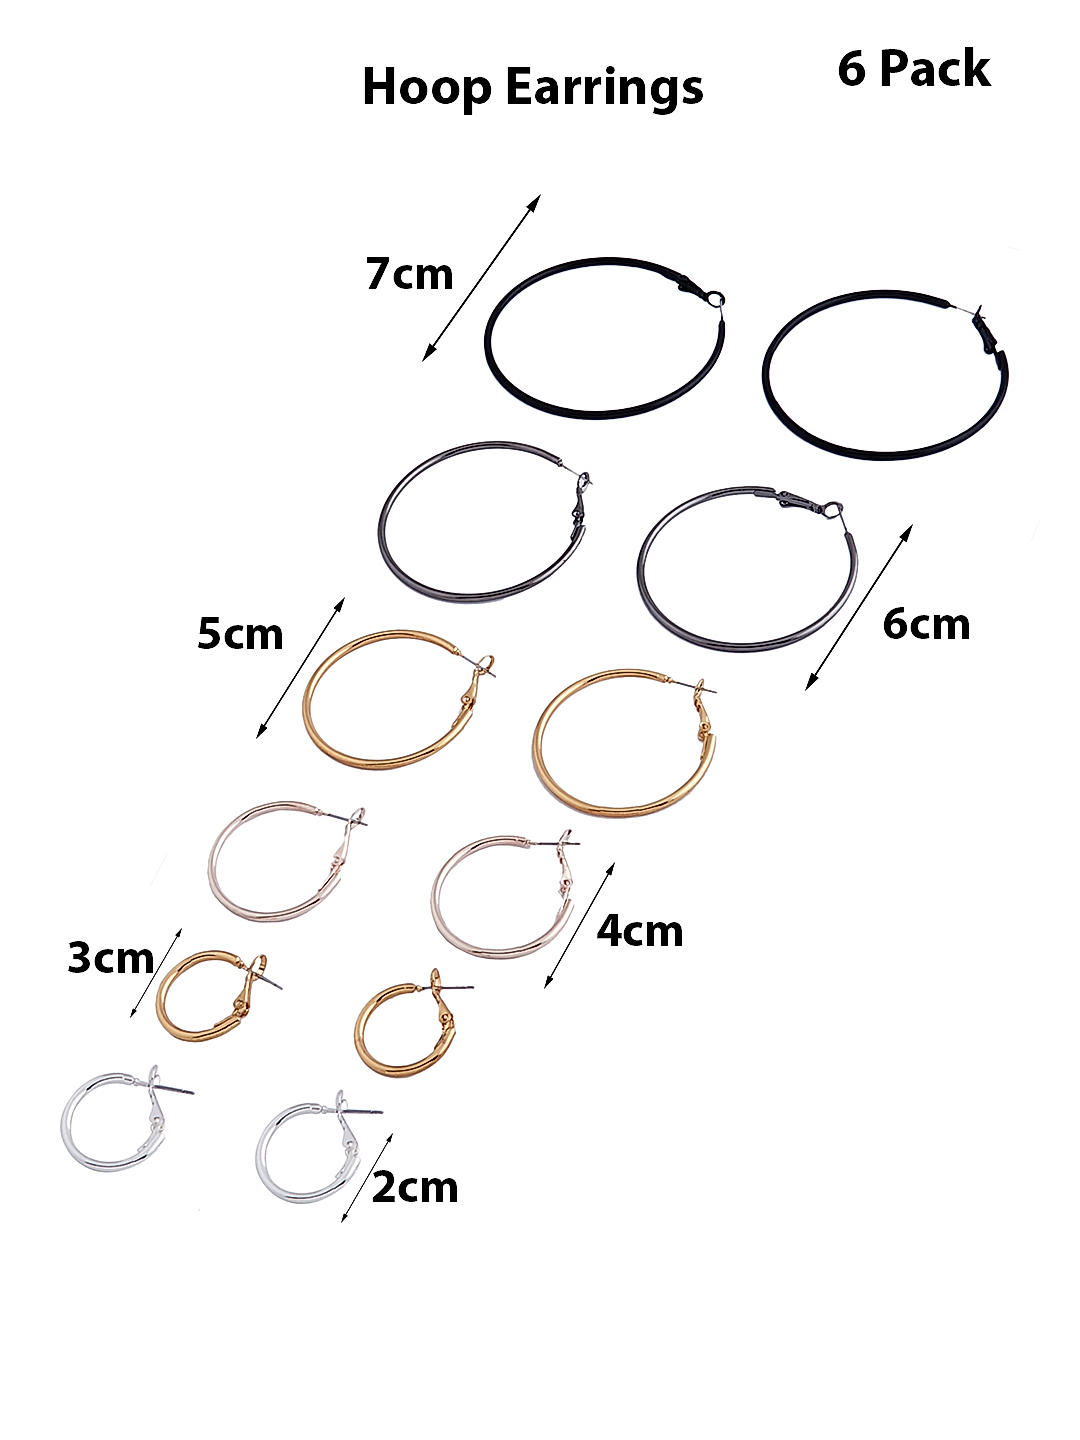 Mid Size Hoop Earring Set 3ct - A New Day™ Gold | Hoop earring sets, Earring  set, Hoop earrings